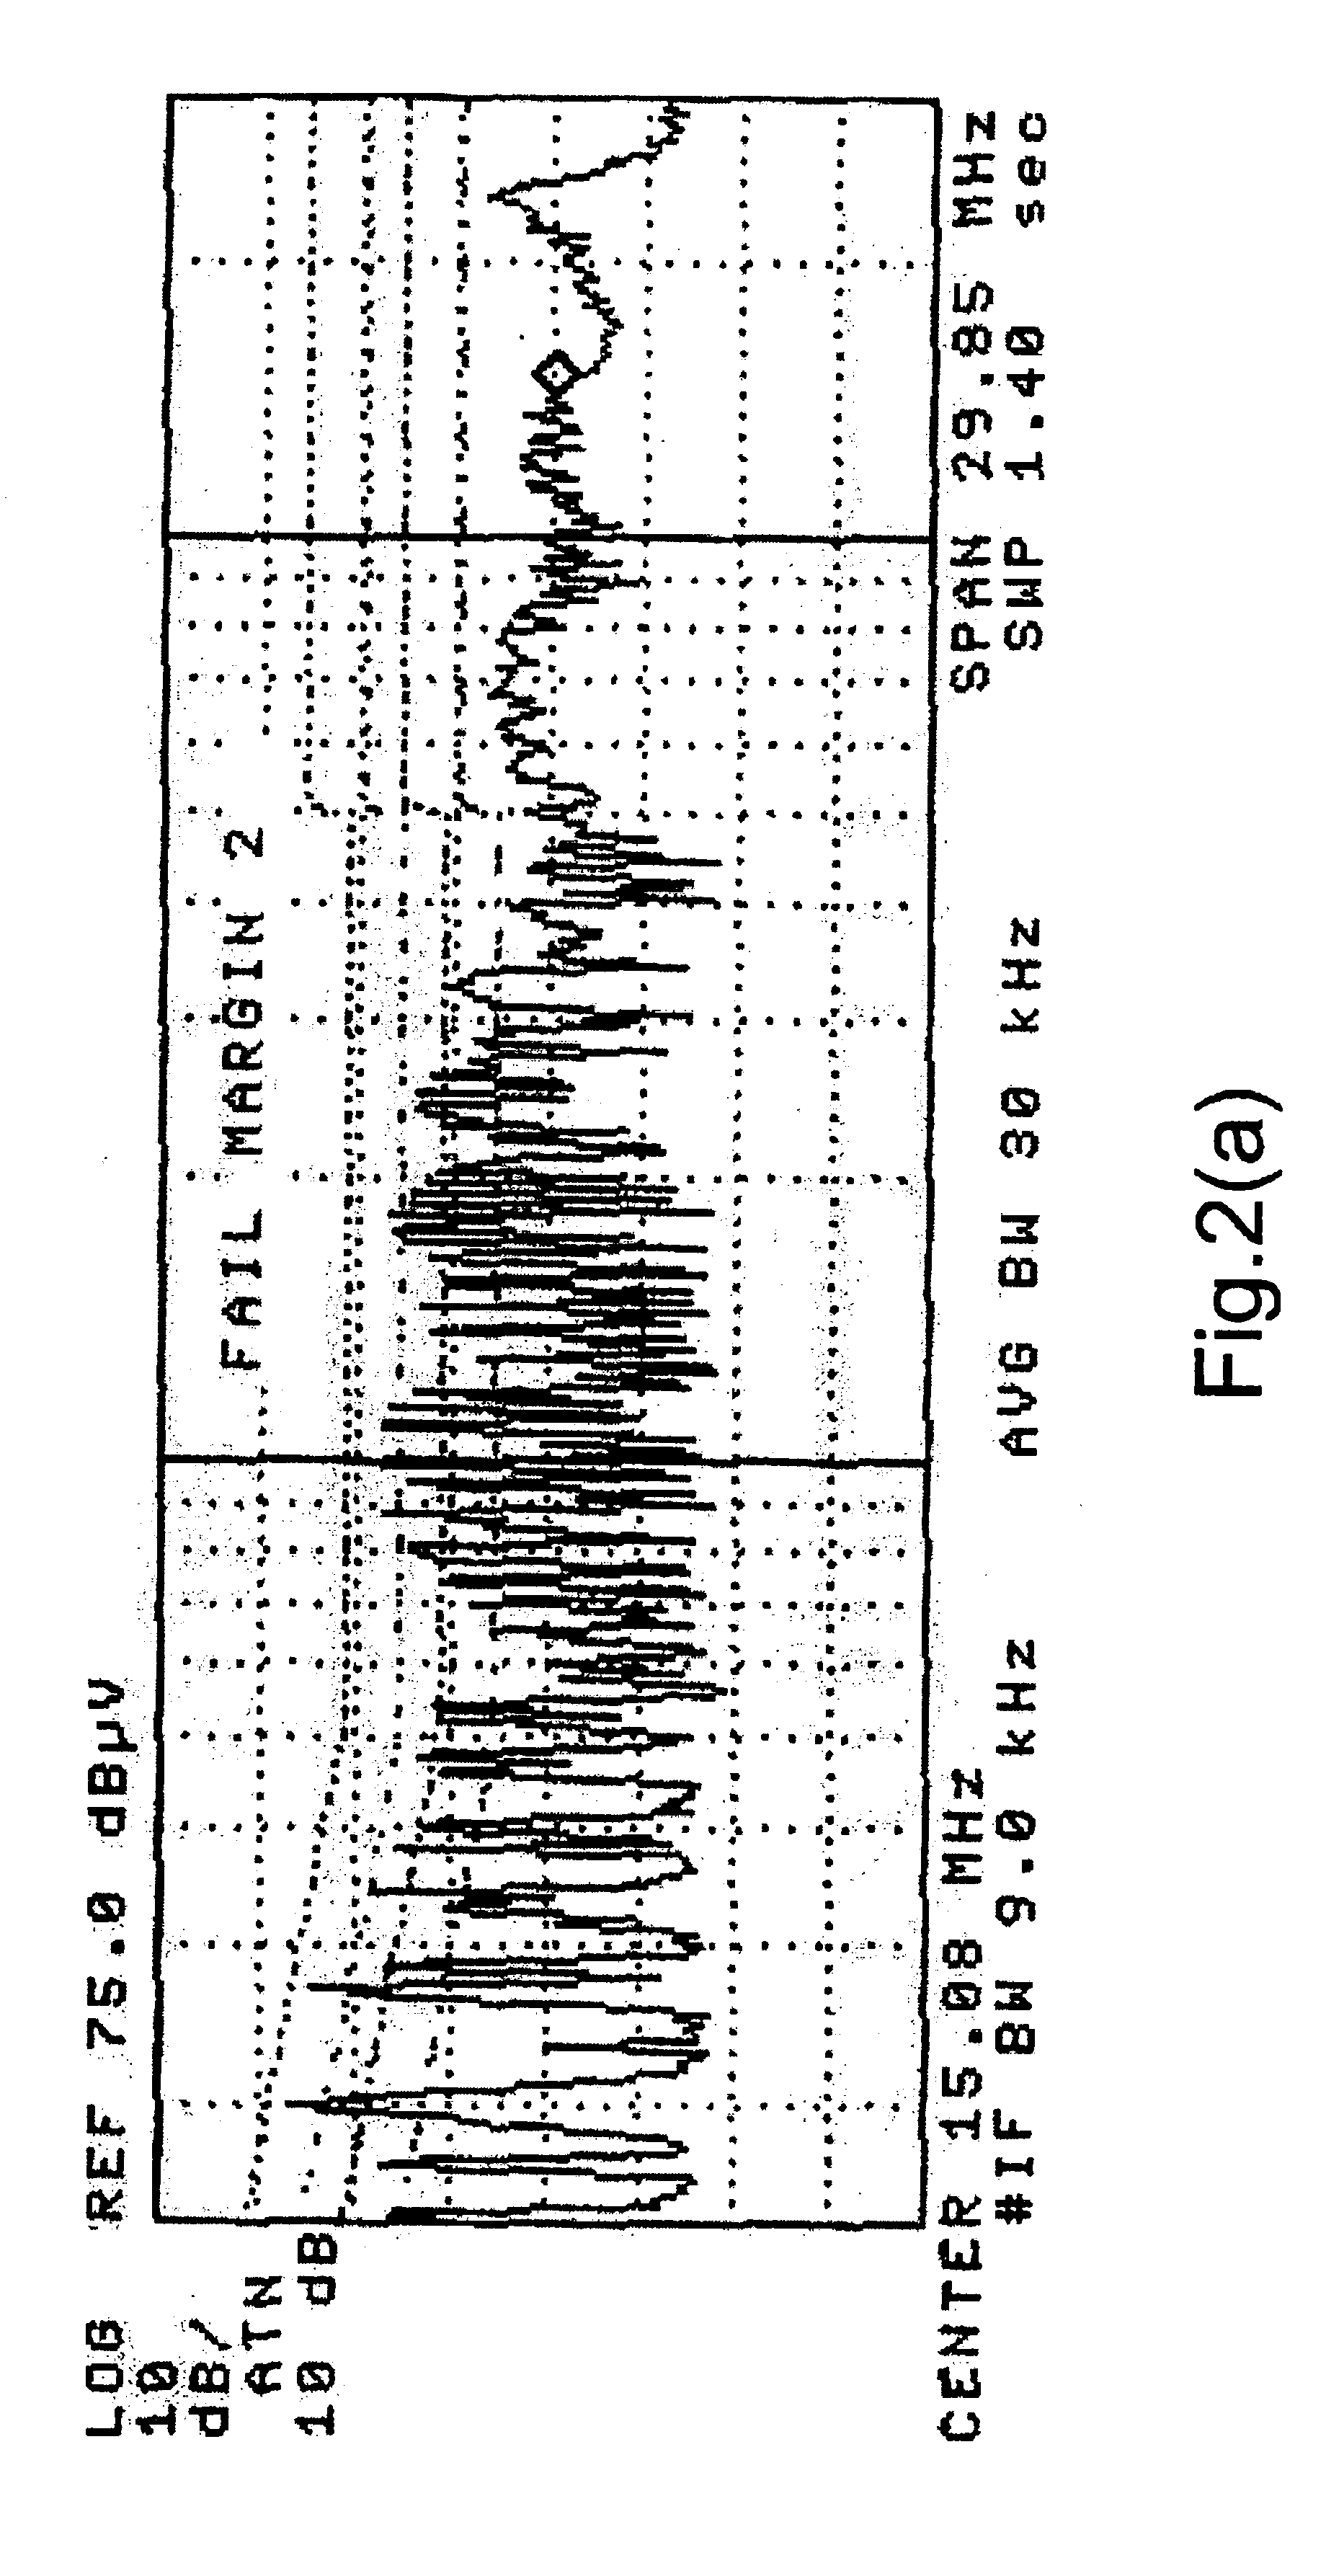 Switching mode power supply incorporating power line filter